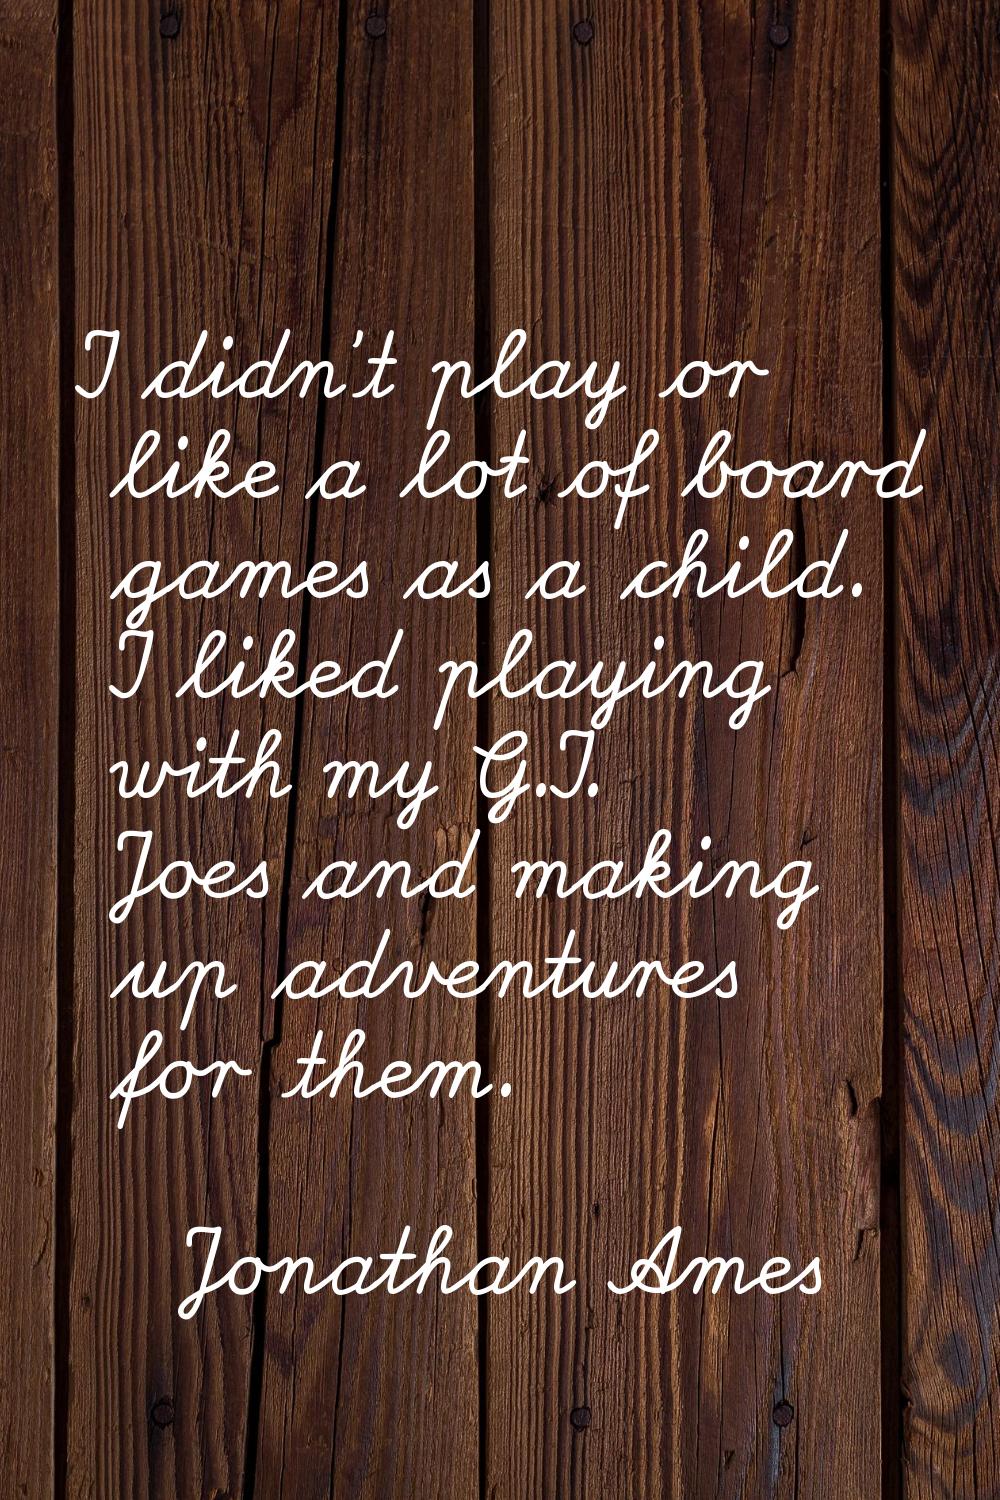 I didn't play or like a lot of board games as a child. I liked playing with my G.I. Joes and making